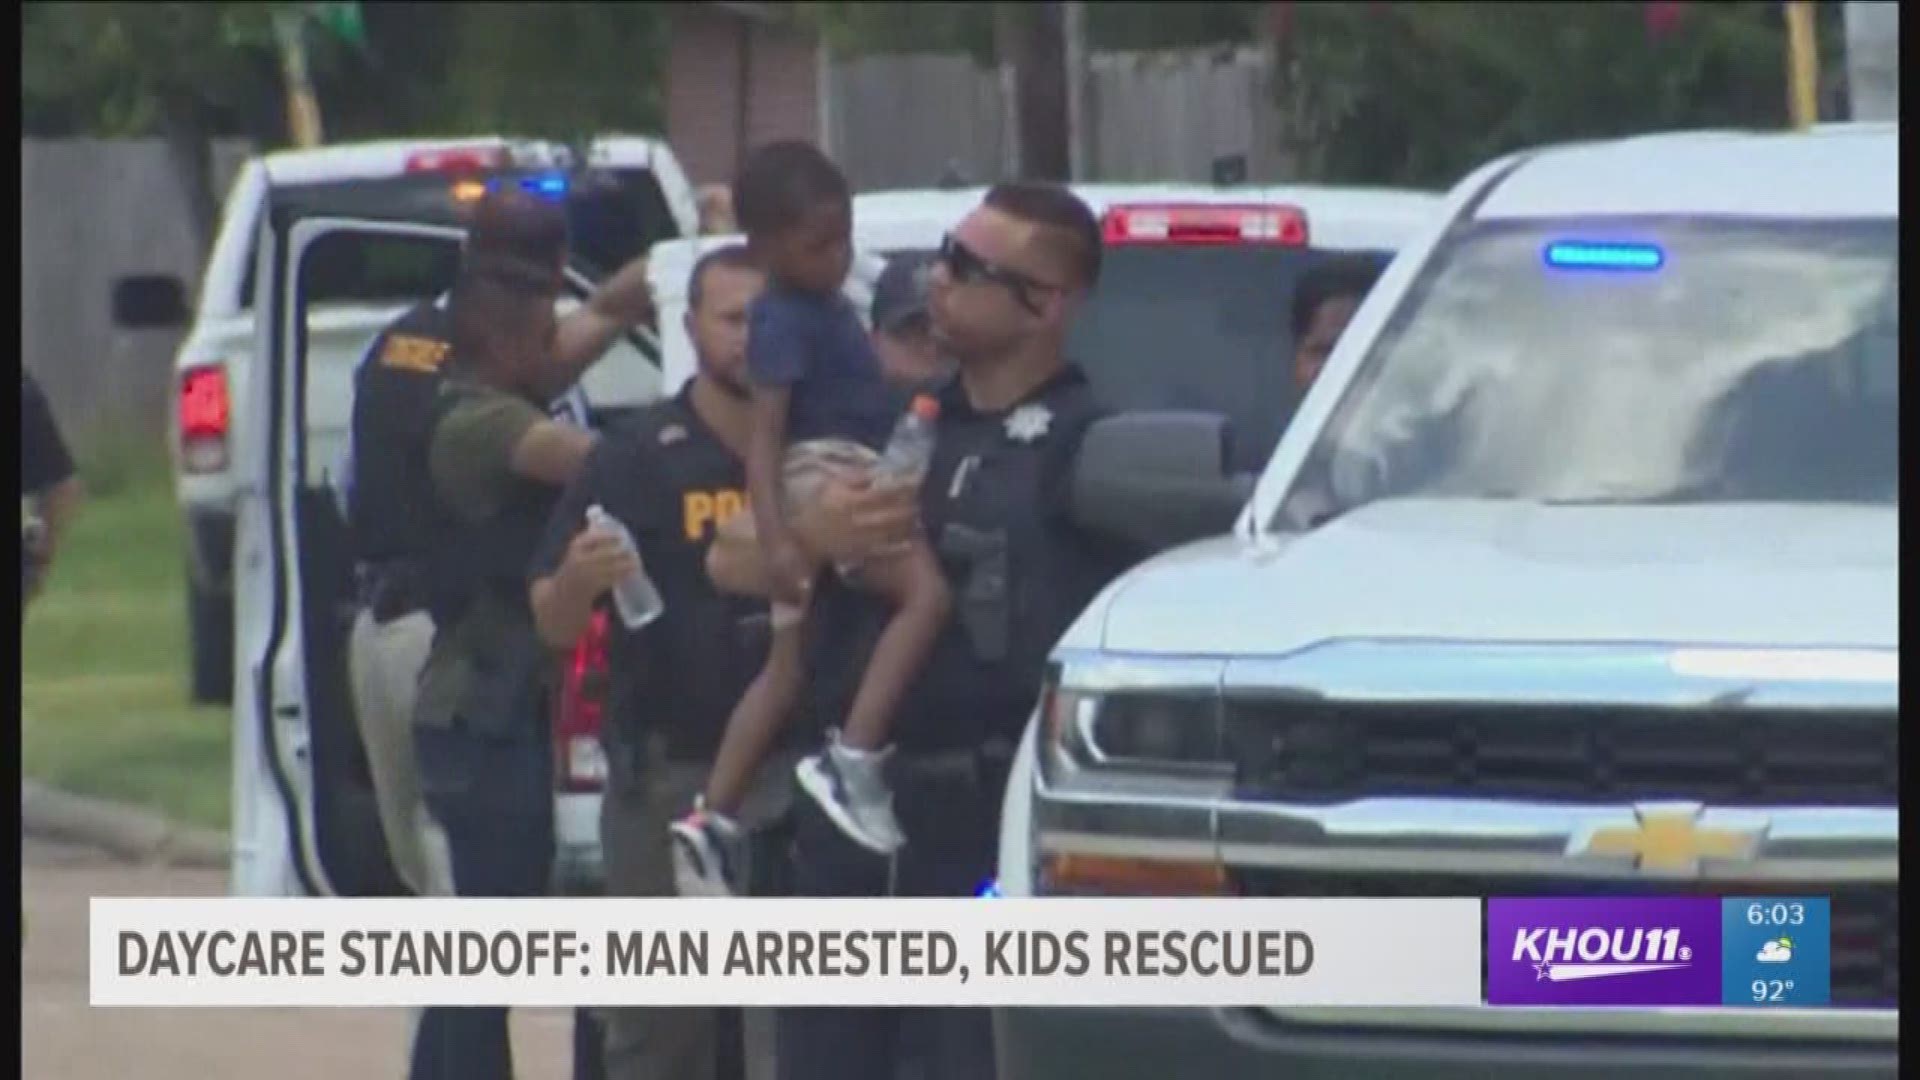 All eight children have been rescued from a Channelview daycare where a chase suspect was holed up. The incident began after deputies tried to pull over the suspect for allegedly running a red light. Police say the suspect ran and fired shots at officers 